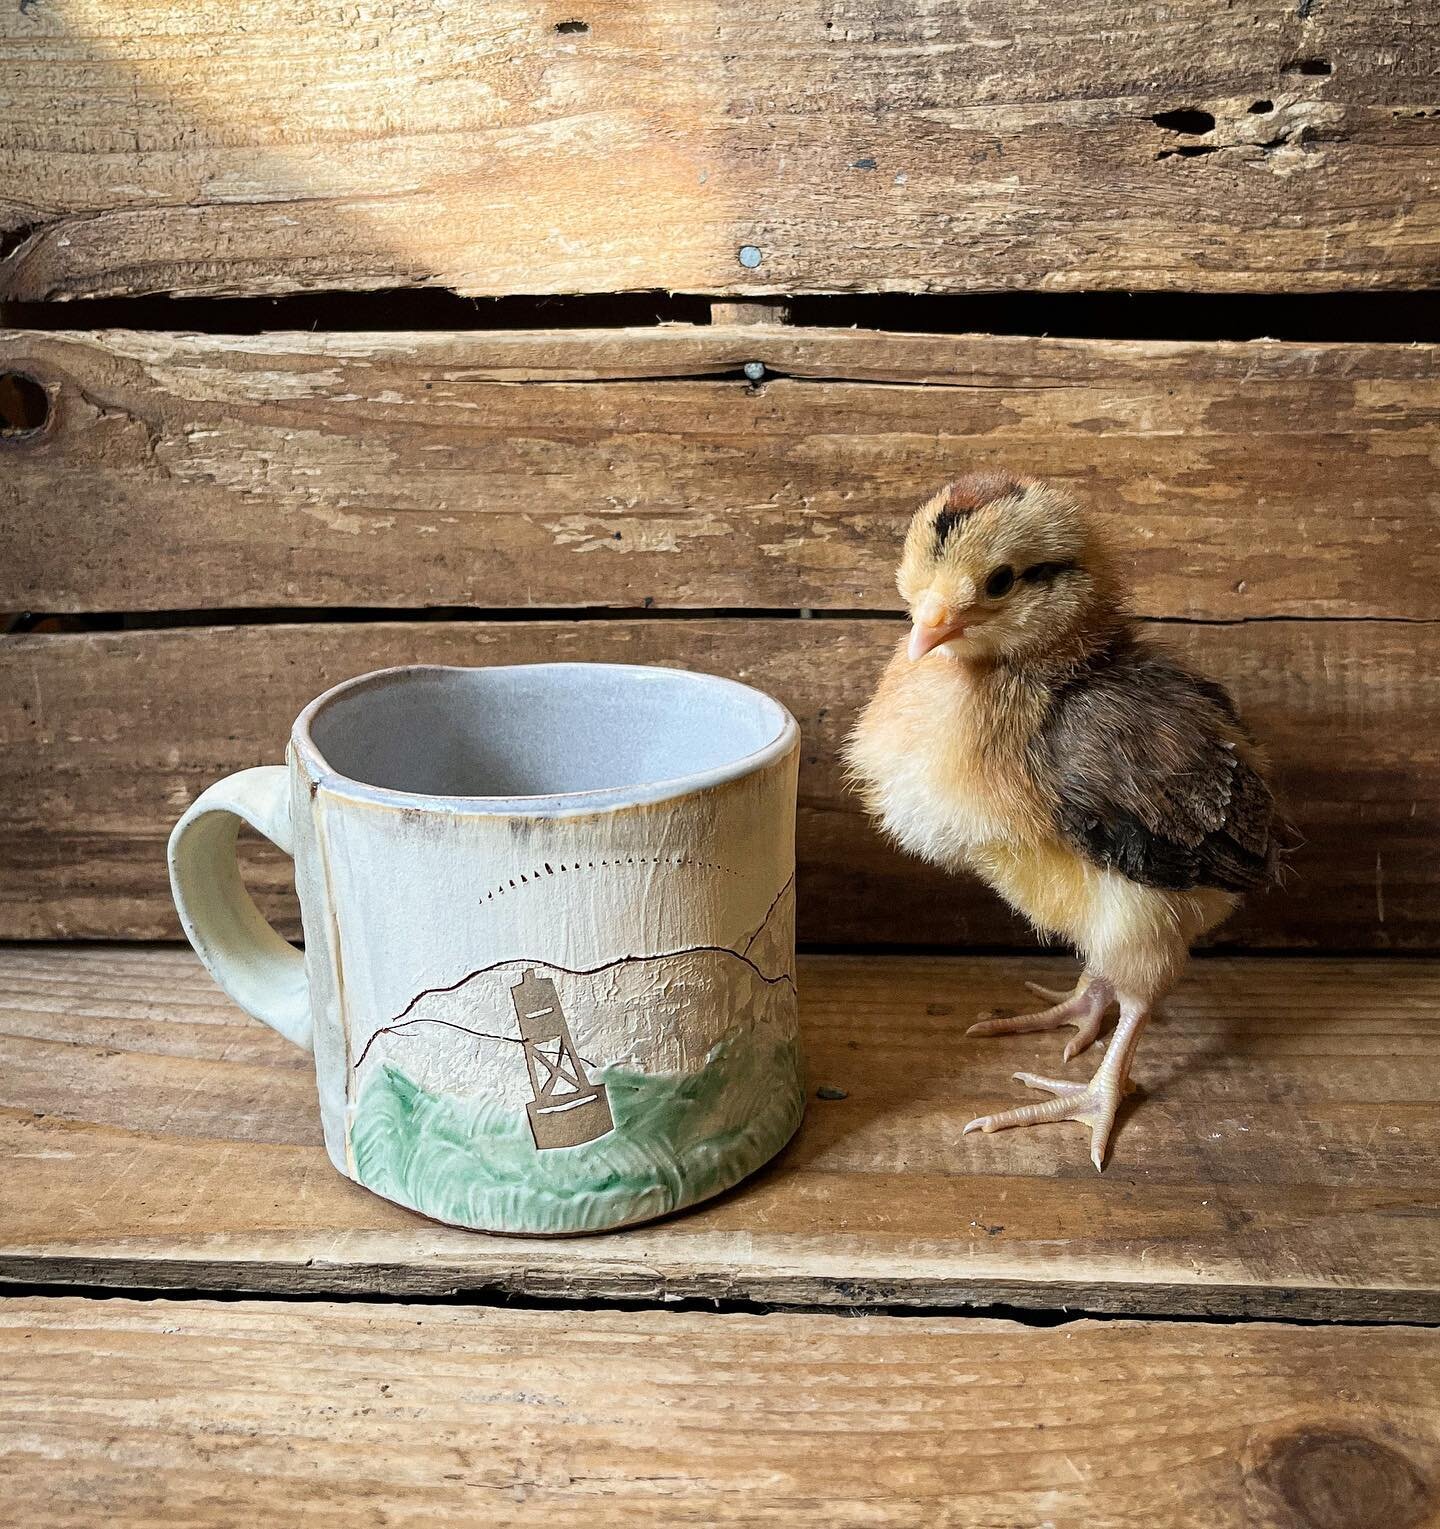 But wait, there&rsquo;s more!
This little chickie wasn&rsquo;t supposed to come home with me but I saw it&rsquo;s cute chipmunk coloring and couldn&rsquo;t say no. Posing with a new mug inspired by my many trips across the straits. 
.
.
.
#drydockgoo